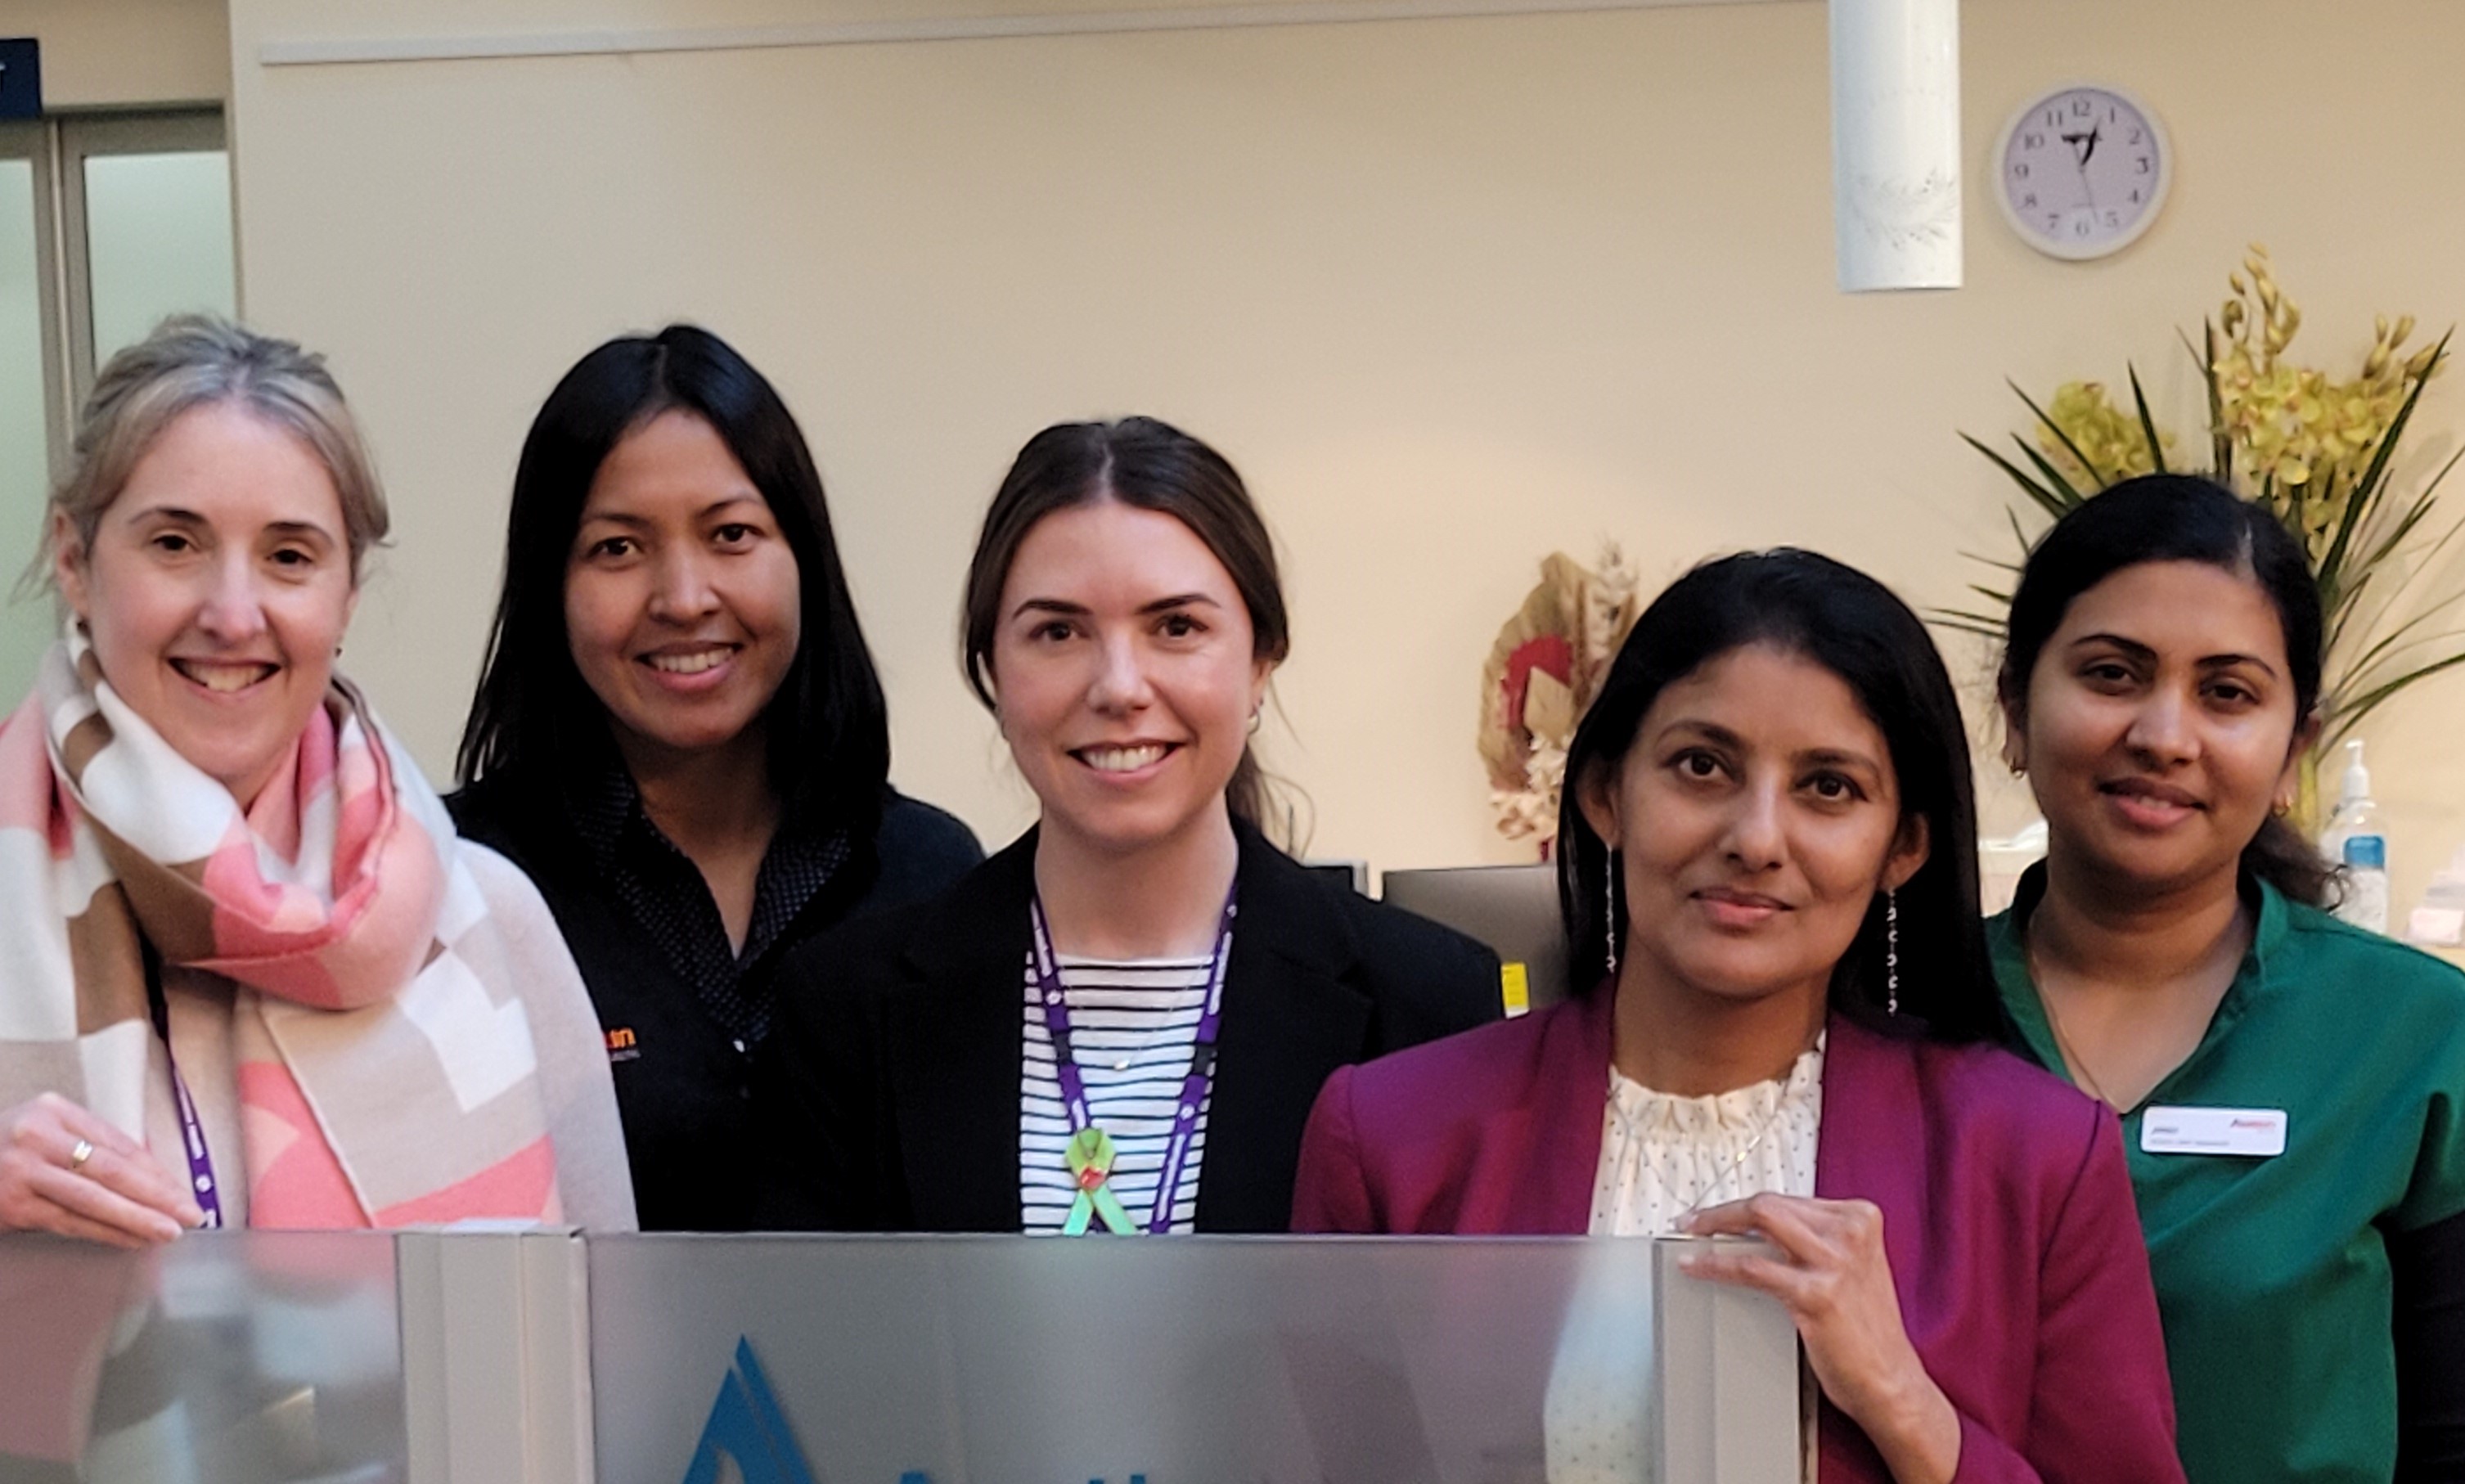 Michelle Braybrook (Clinical Trails Coordinator), Lucille Scott (Radiation Therapist), Jayme Goldsmith (Colorectal Cancer Coordinator), Thanuja Thachil (Radiation Oncologist) and Jinu Andrews (Nurse Unit Manager). 